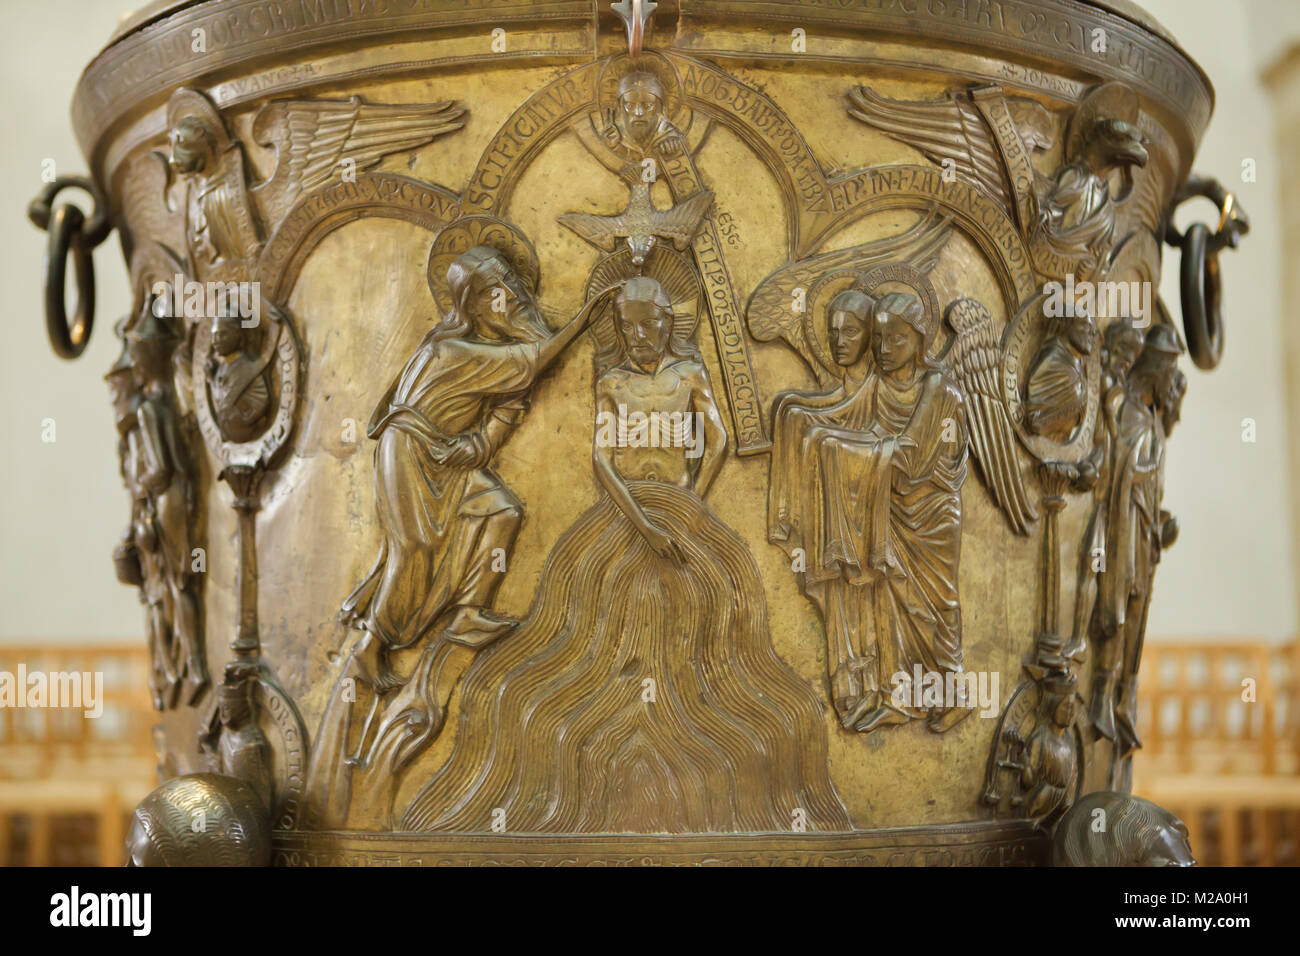 Baptism of Jesus. Romanesque relief on the bronze baptismal font (Bronzetaufe) from the 11th century in the Hildesheim Cathedral (Hildesheimer Dom) in Hildesheim in Lower Saxony, Germany. Stock Photo